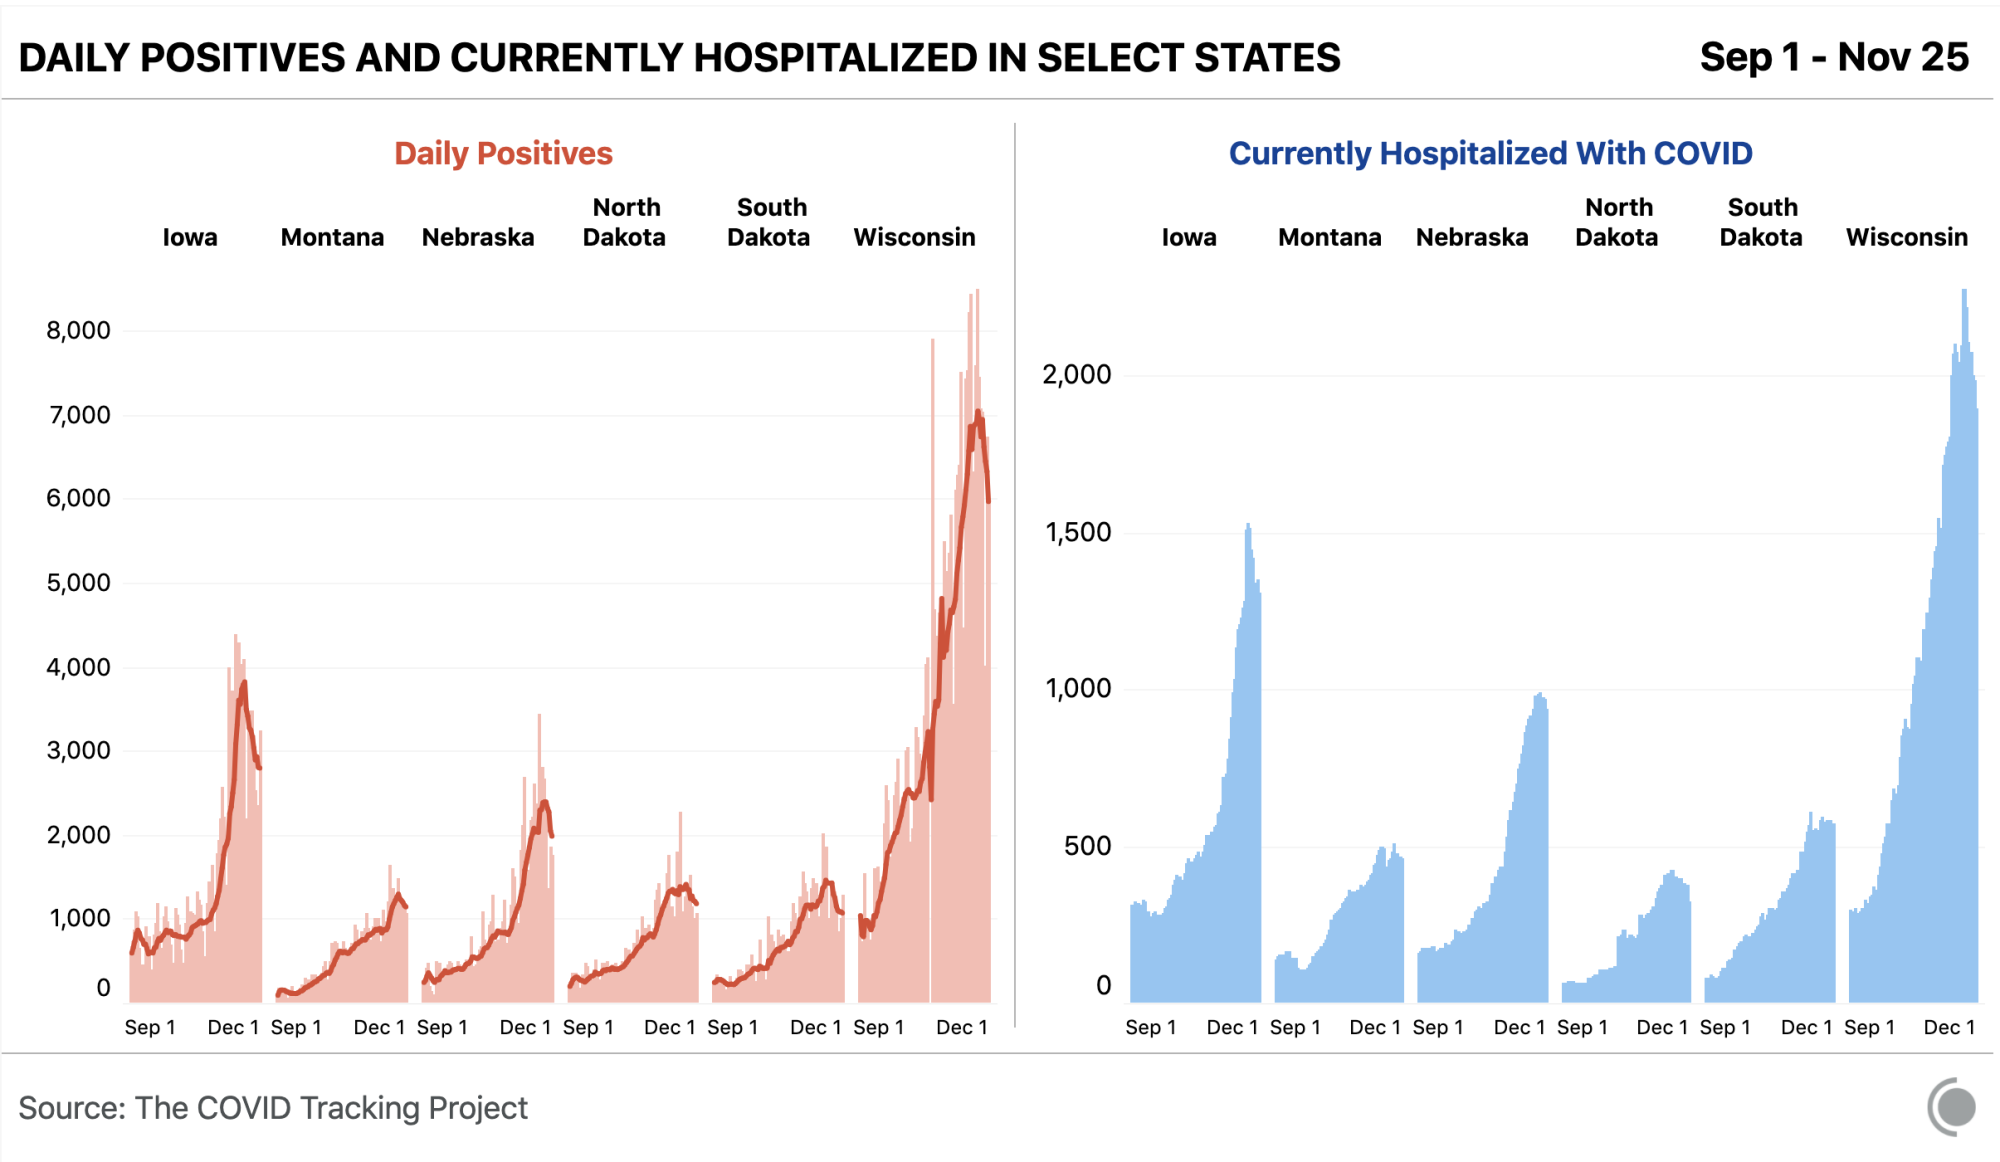 Charts showing both the number of new cases reported and the number of people currently hospitalized in Iowa, Montana, Nebraska, North Dakota, South Dakota, and Wisconsin, from September 1 to November 25.